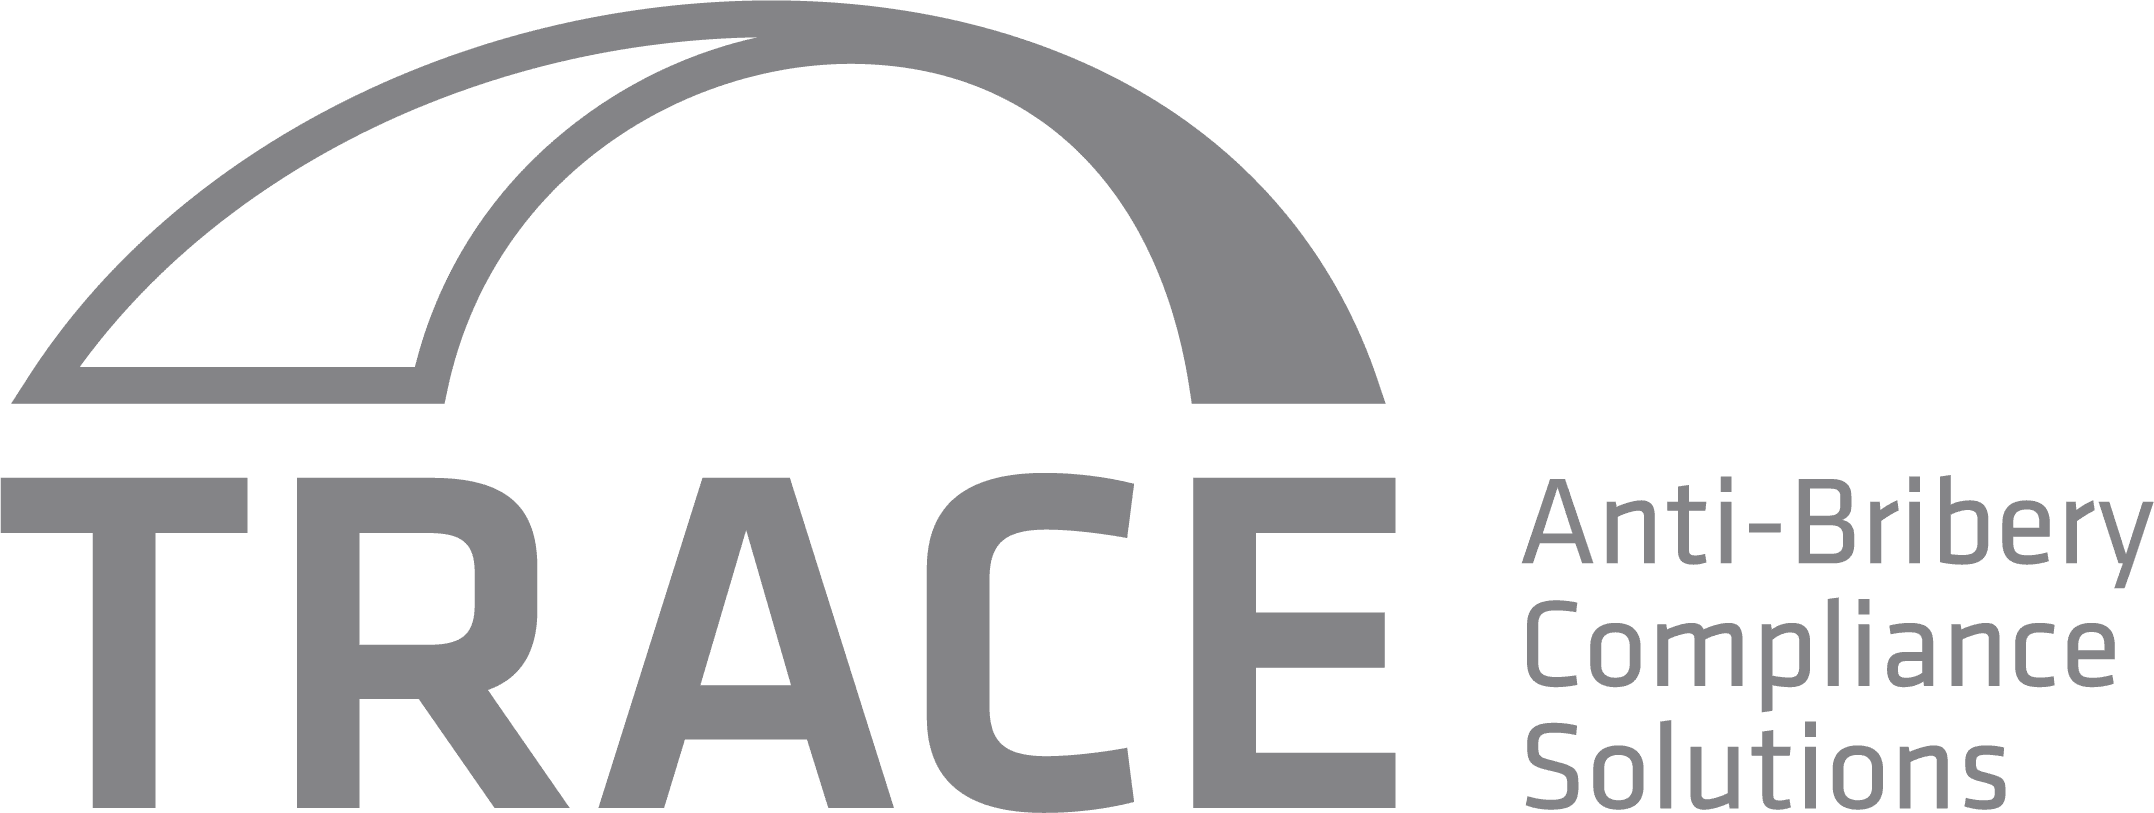 TRACE: Anti-Bribery Compliance Solutions